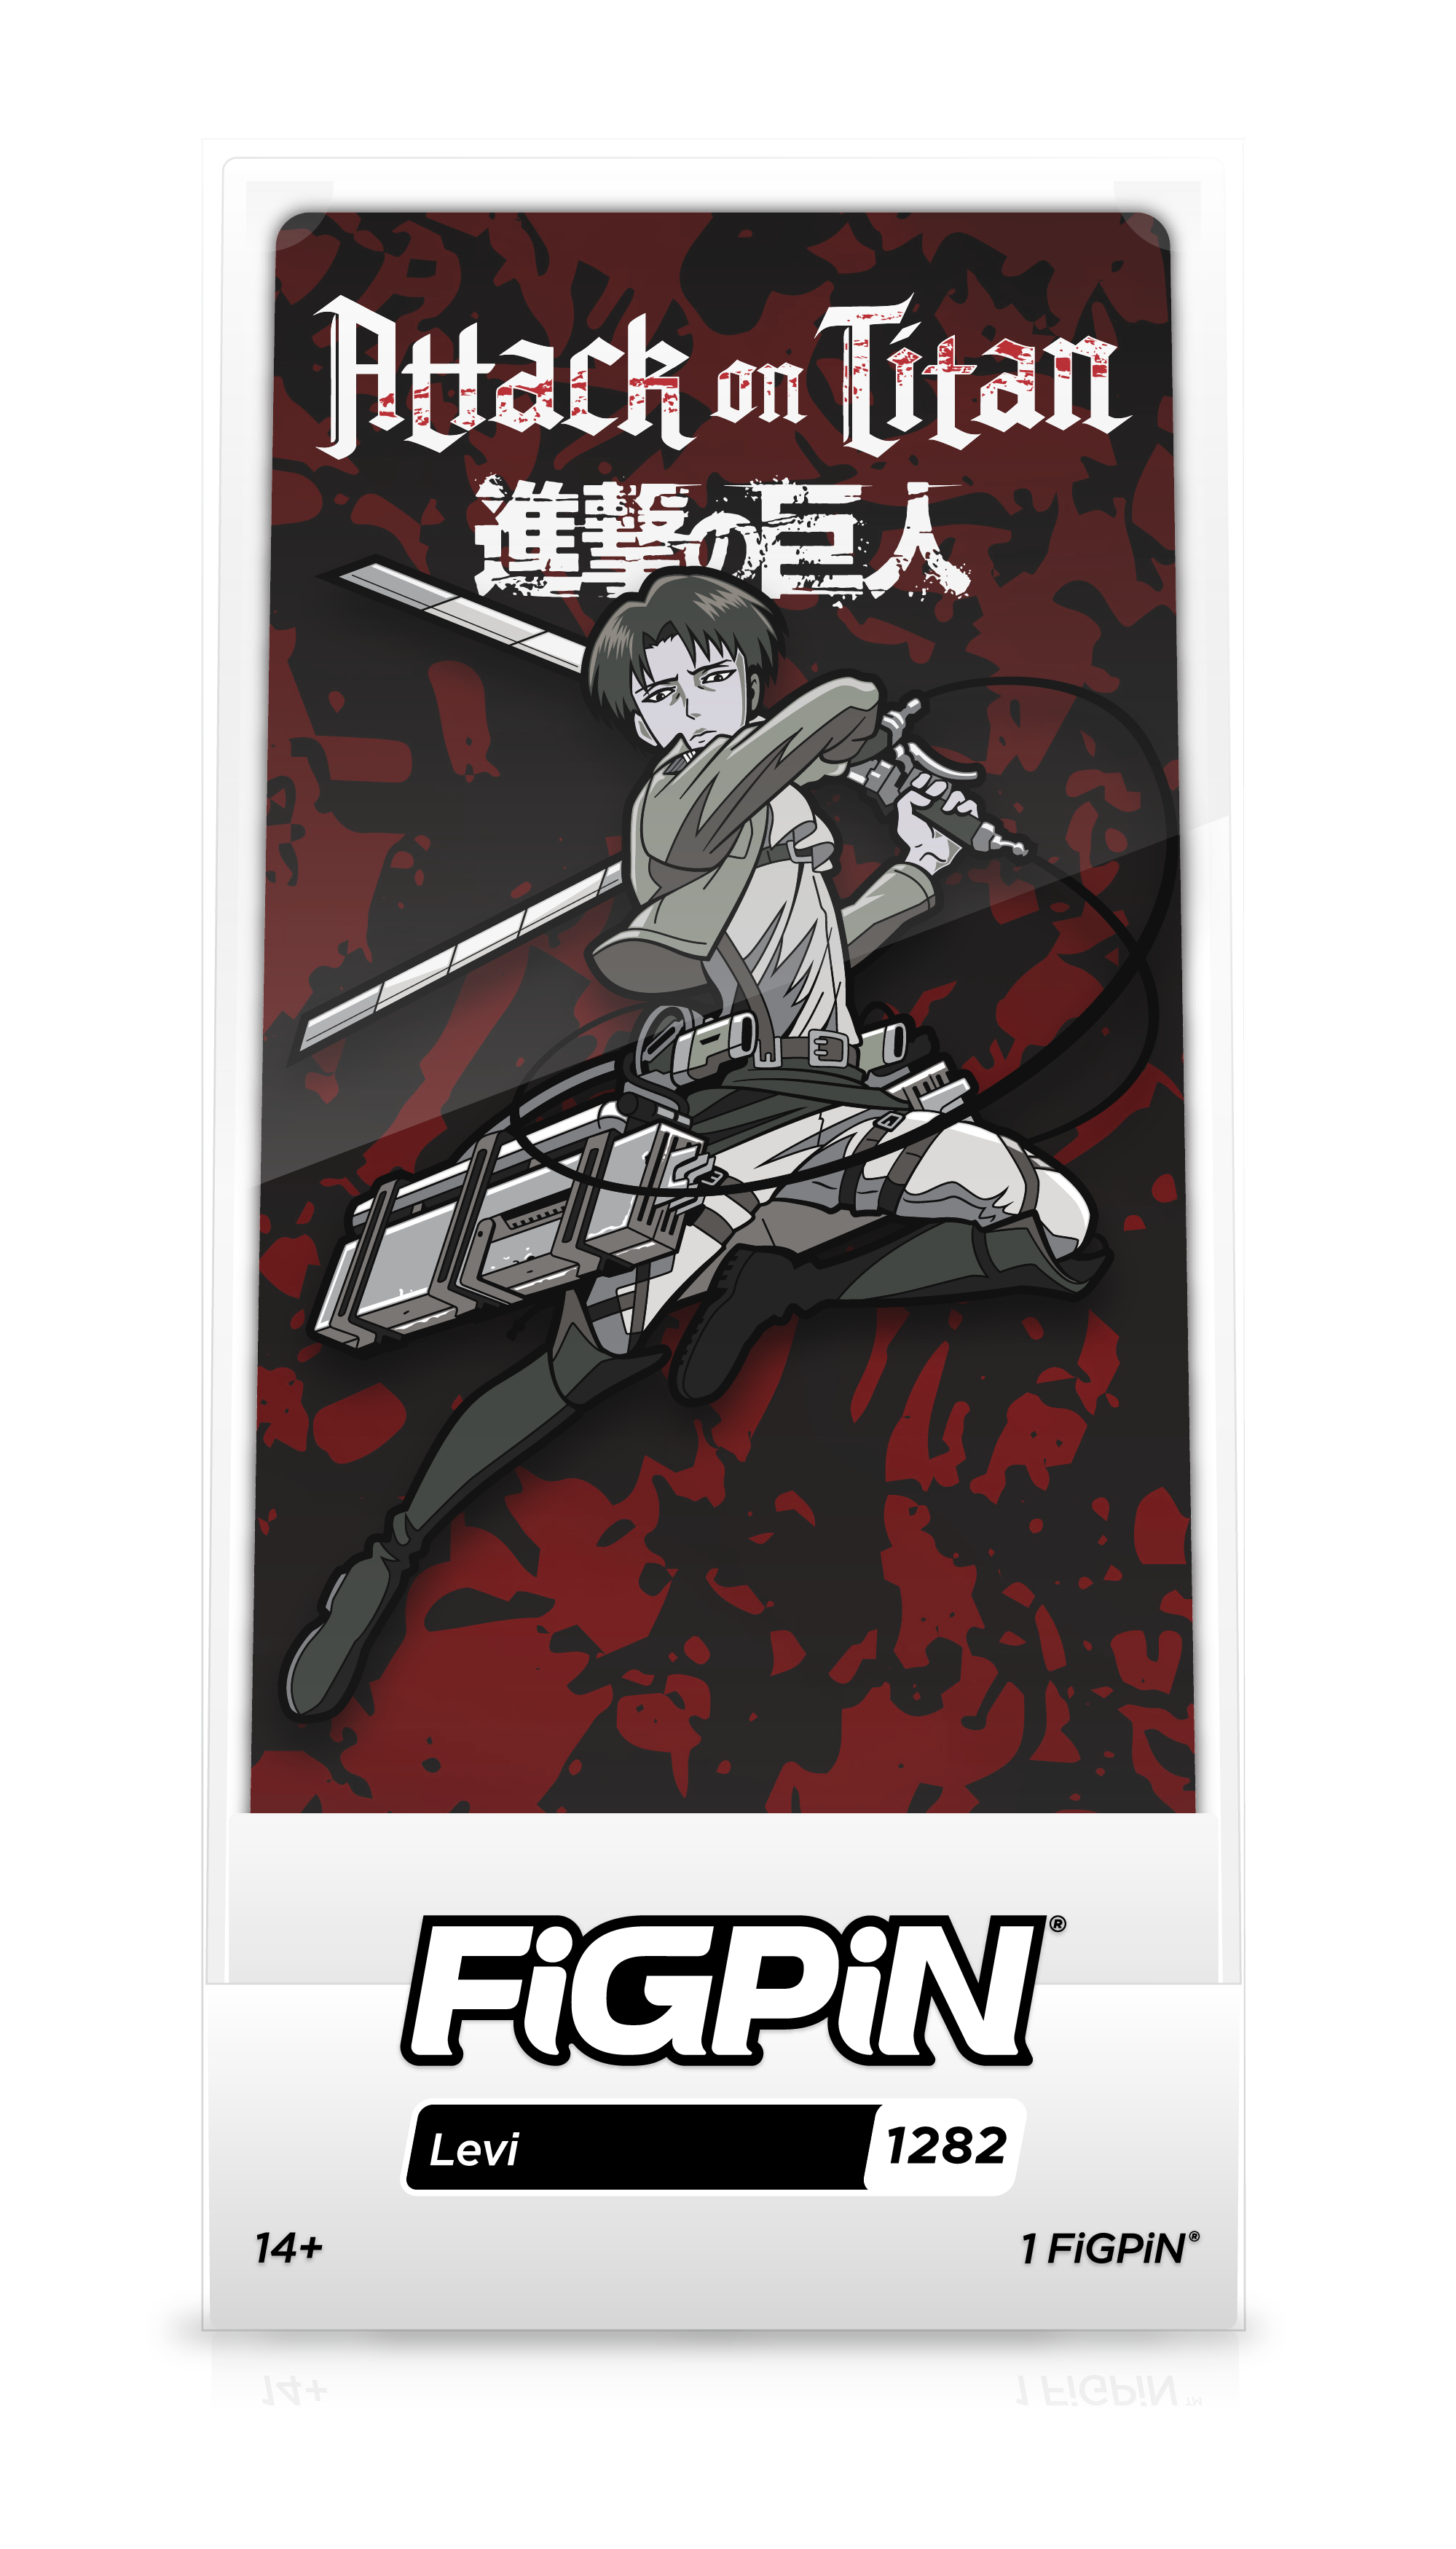 Front view of Attack on Titan's Levi enamel pin inside FiGPiN Display case reading "FiGPiN - Levi (1282)".